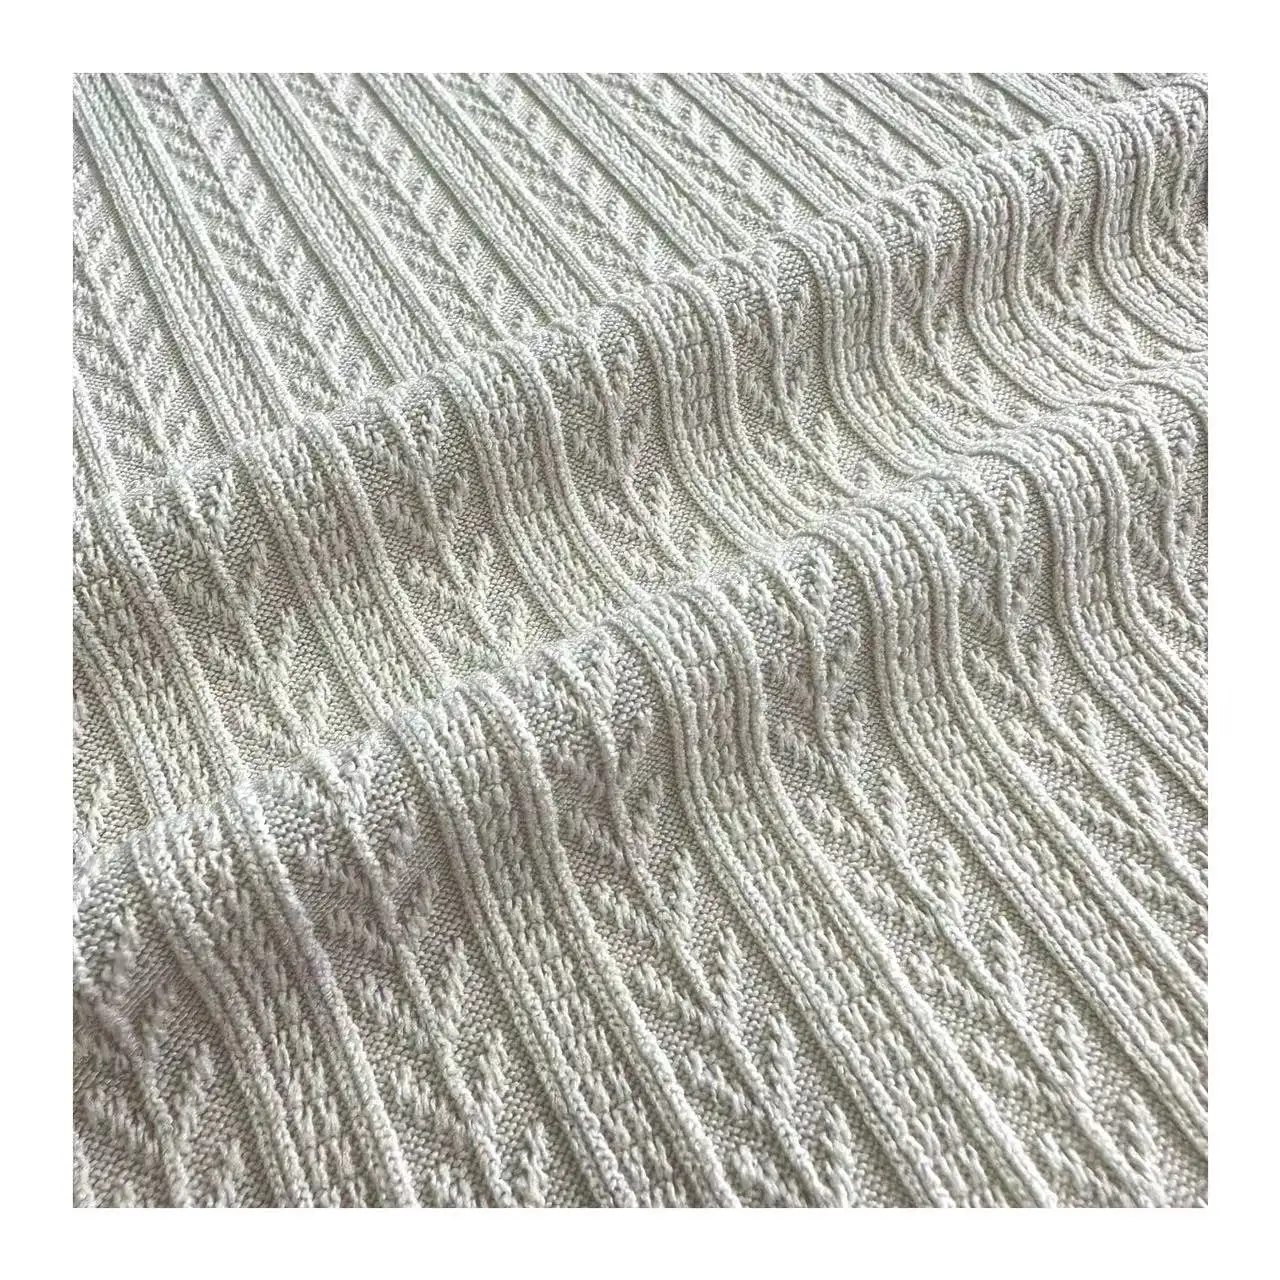 garment New design knitted fabric 95%polyester 5%spandex stretchy 3D jacquard fabric for sweater and clothing